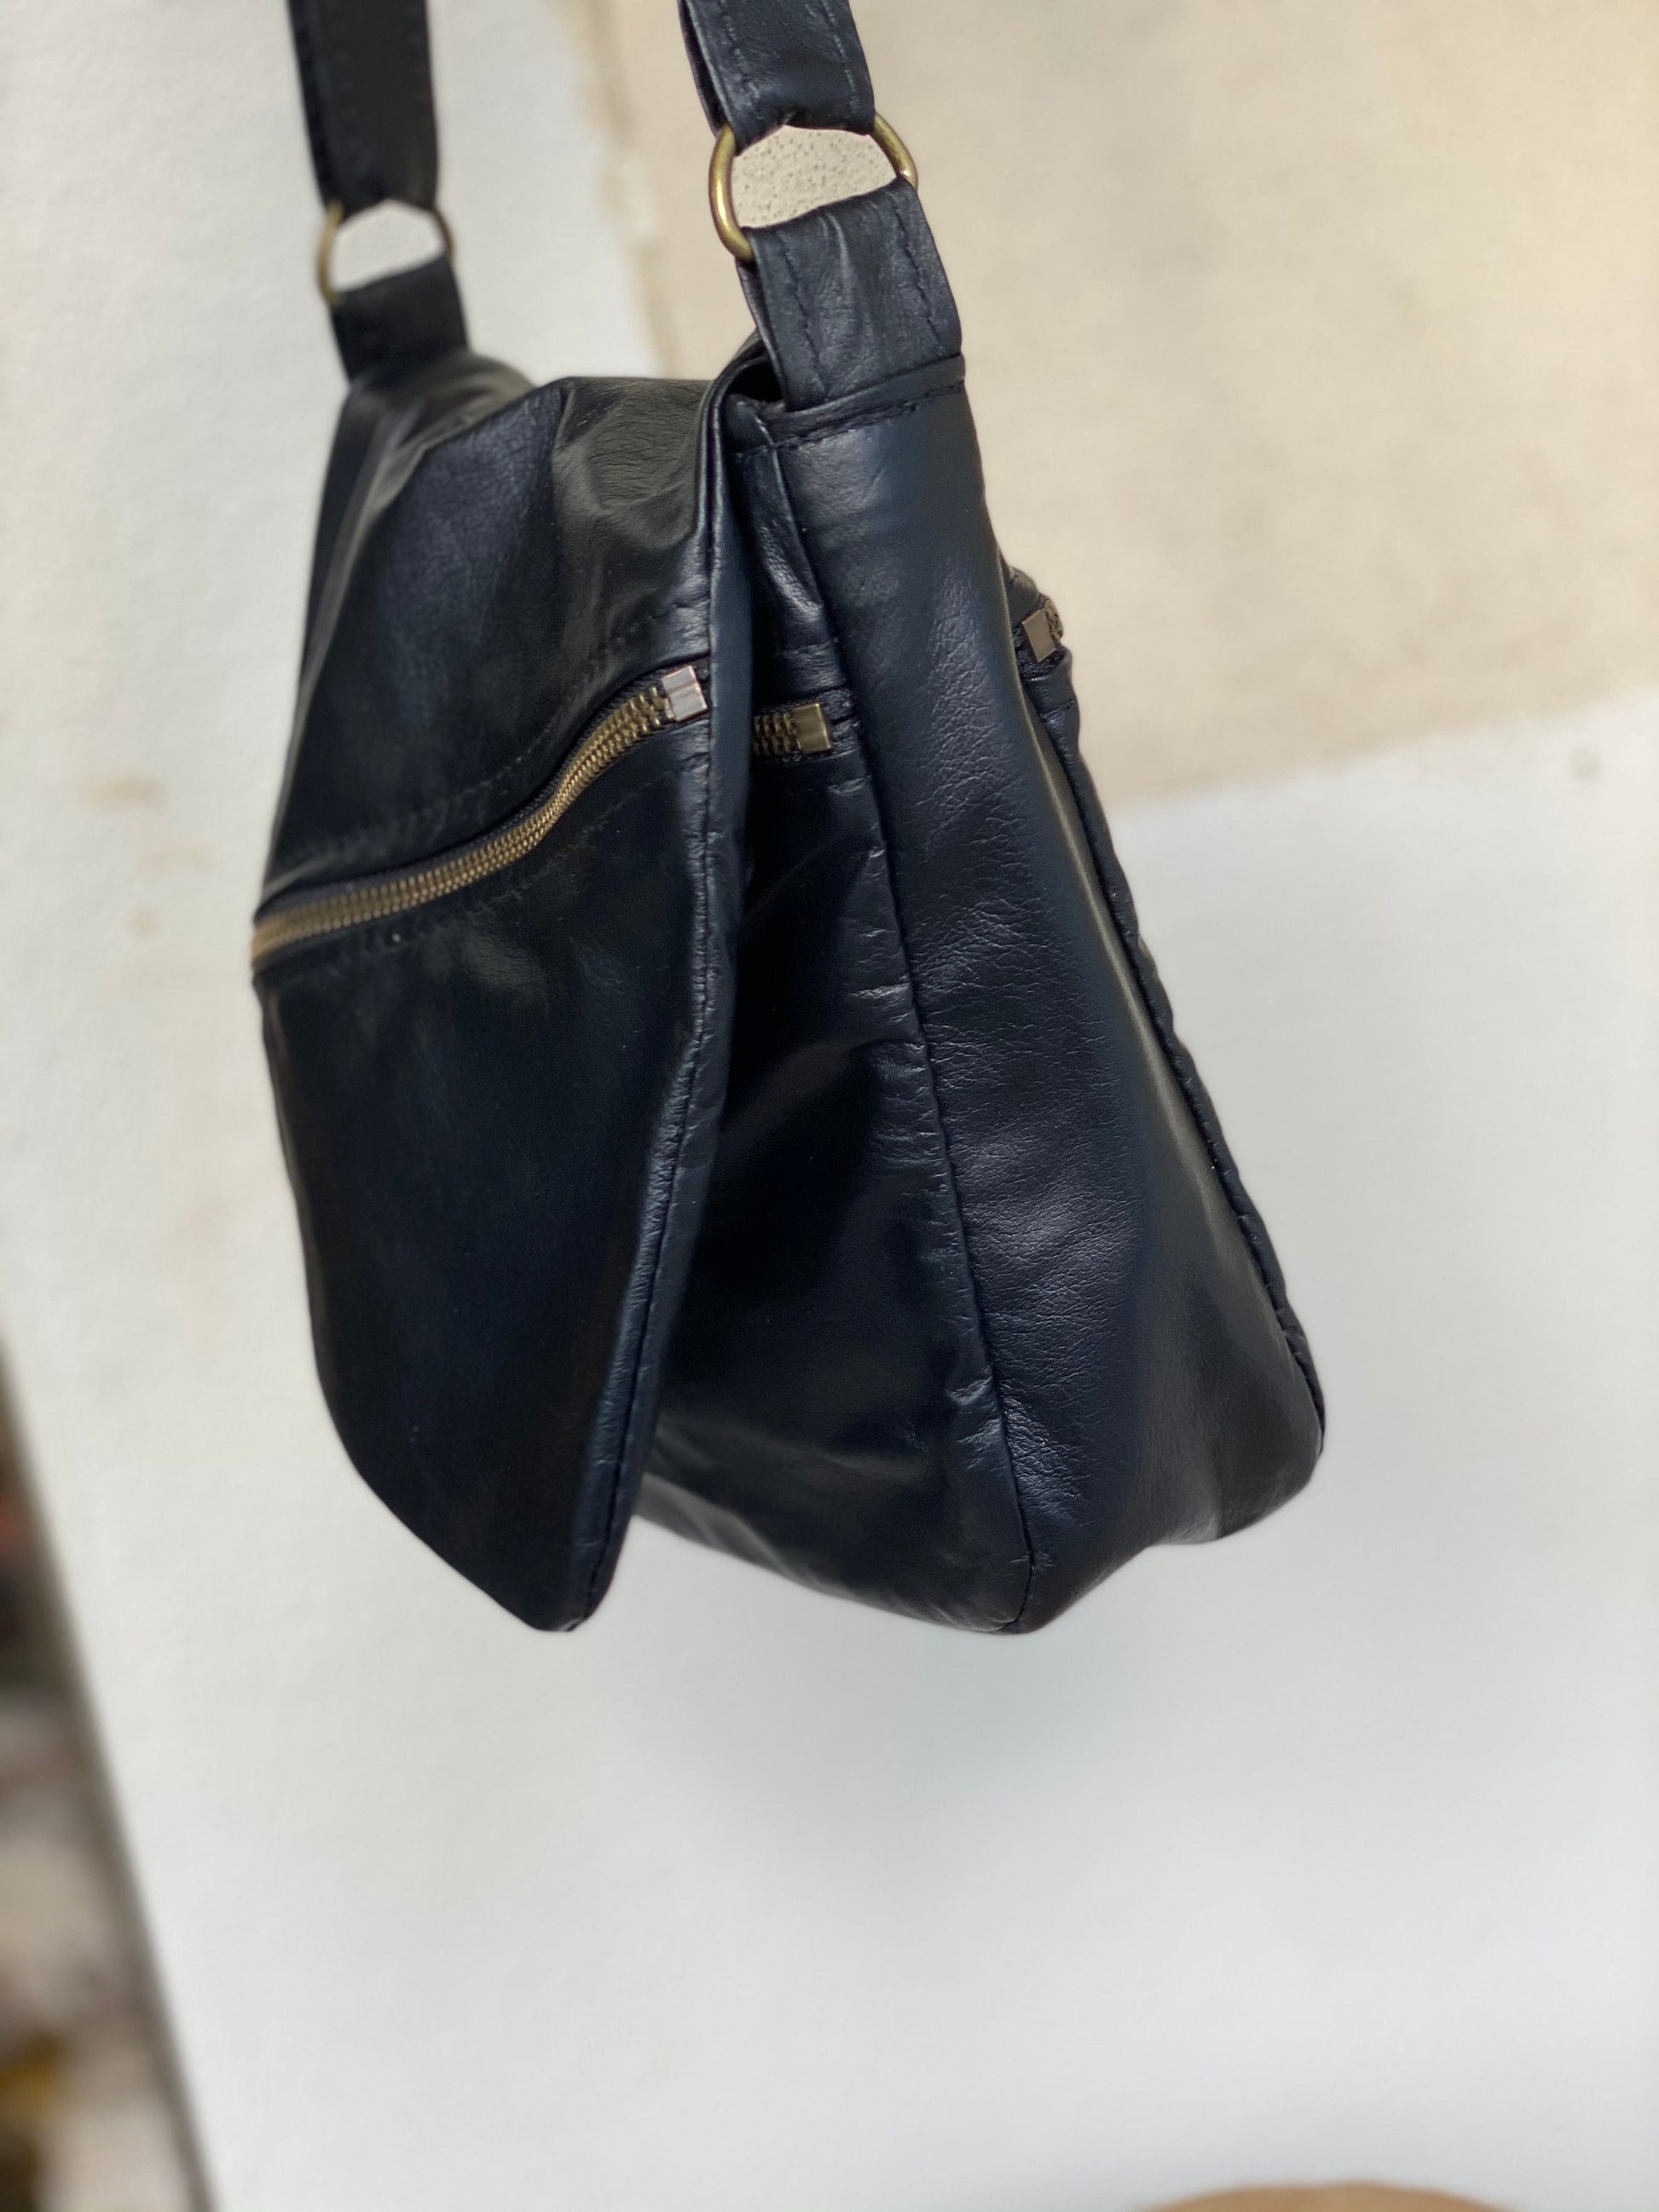 The Real McCaul Shoulder Bags Universal Satchel Bag- Extra Small Australian Made Australian Owned Leather Satchel Bag- Australian Made in Kangaroo and Cowhide Leather